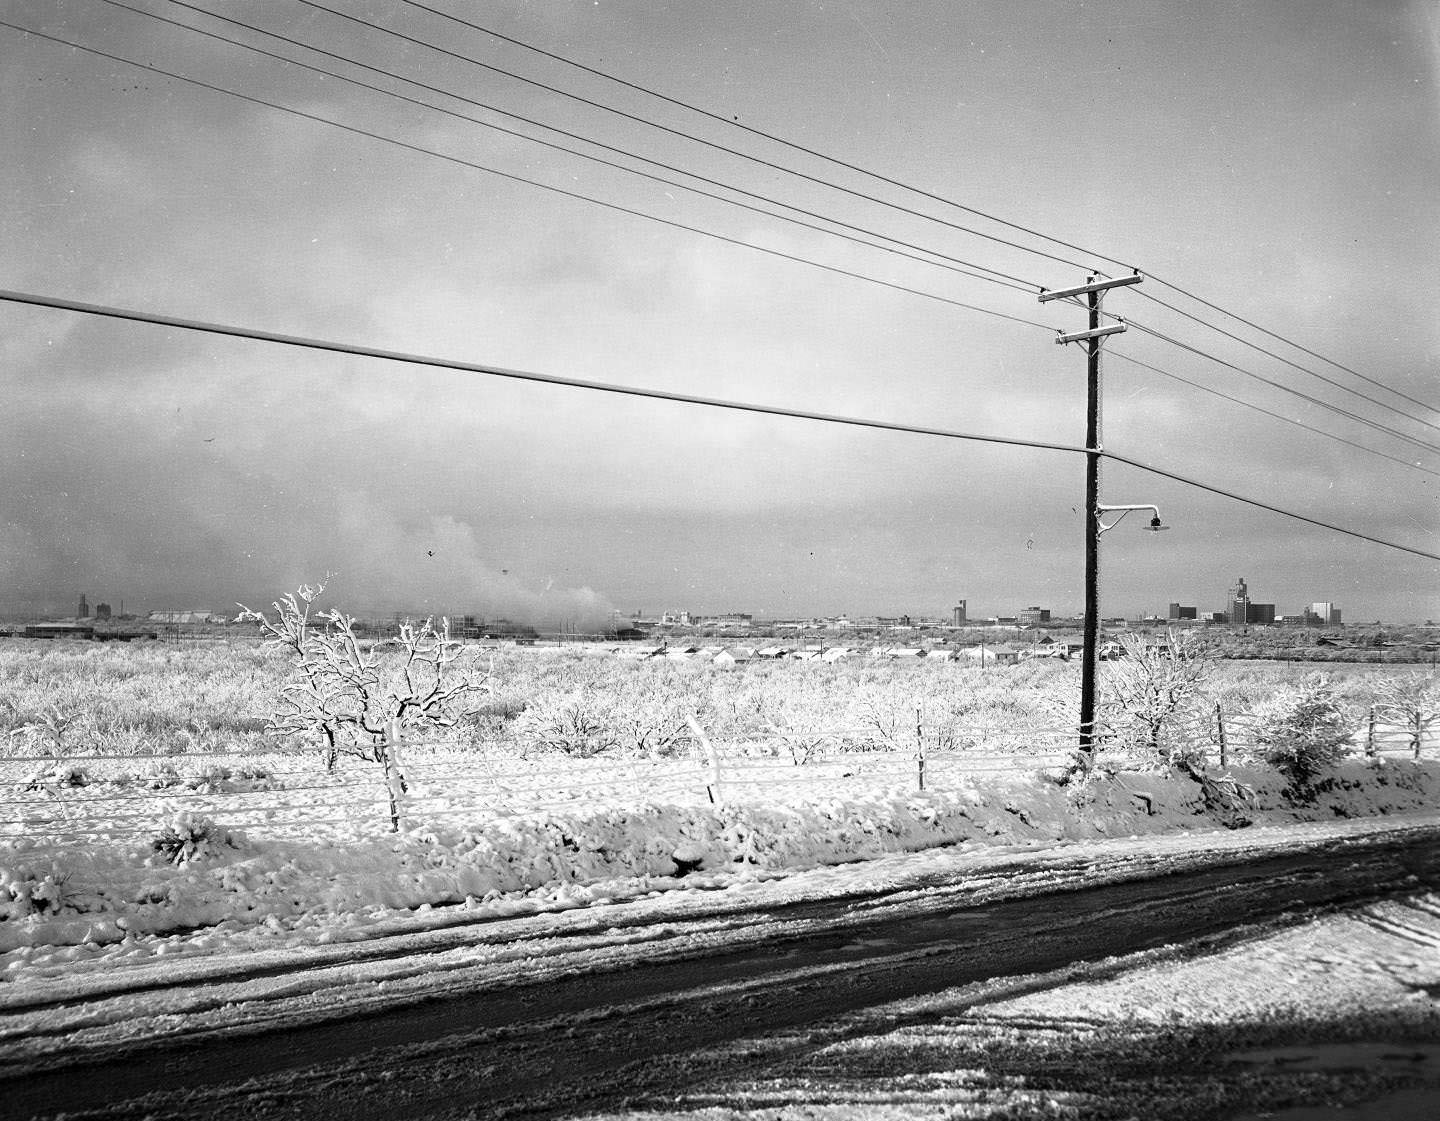 A snow covered field, road, barbed wire fence, and power lines, 1959